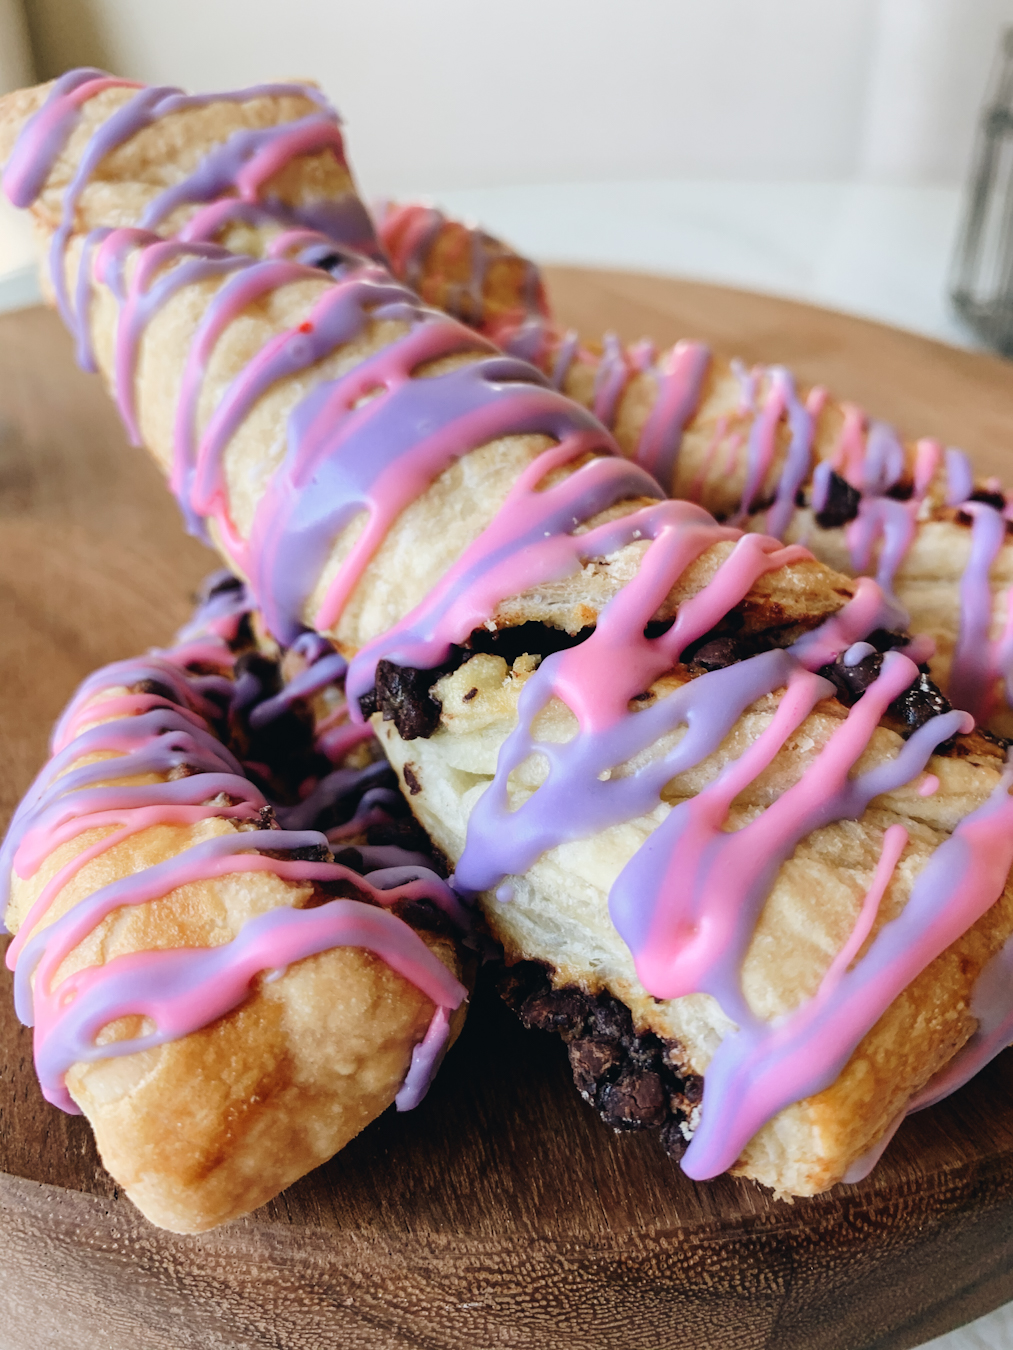 Three Cheshire Cat Tail Pastries stacked on top of each other, they are puff pastries with purple and pink icing.